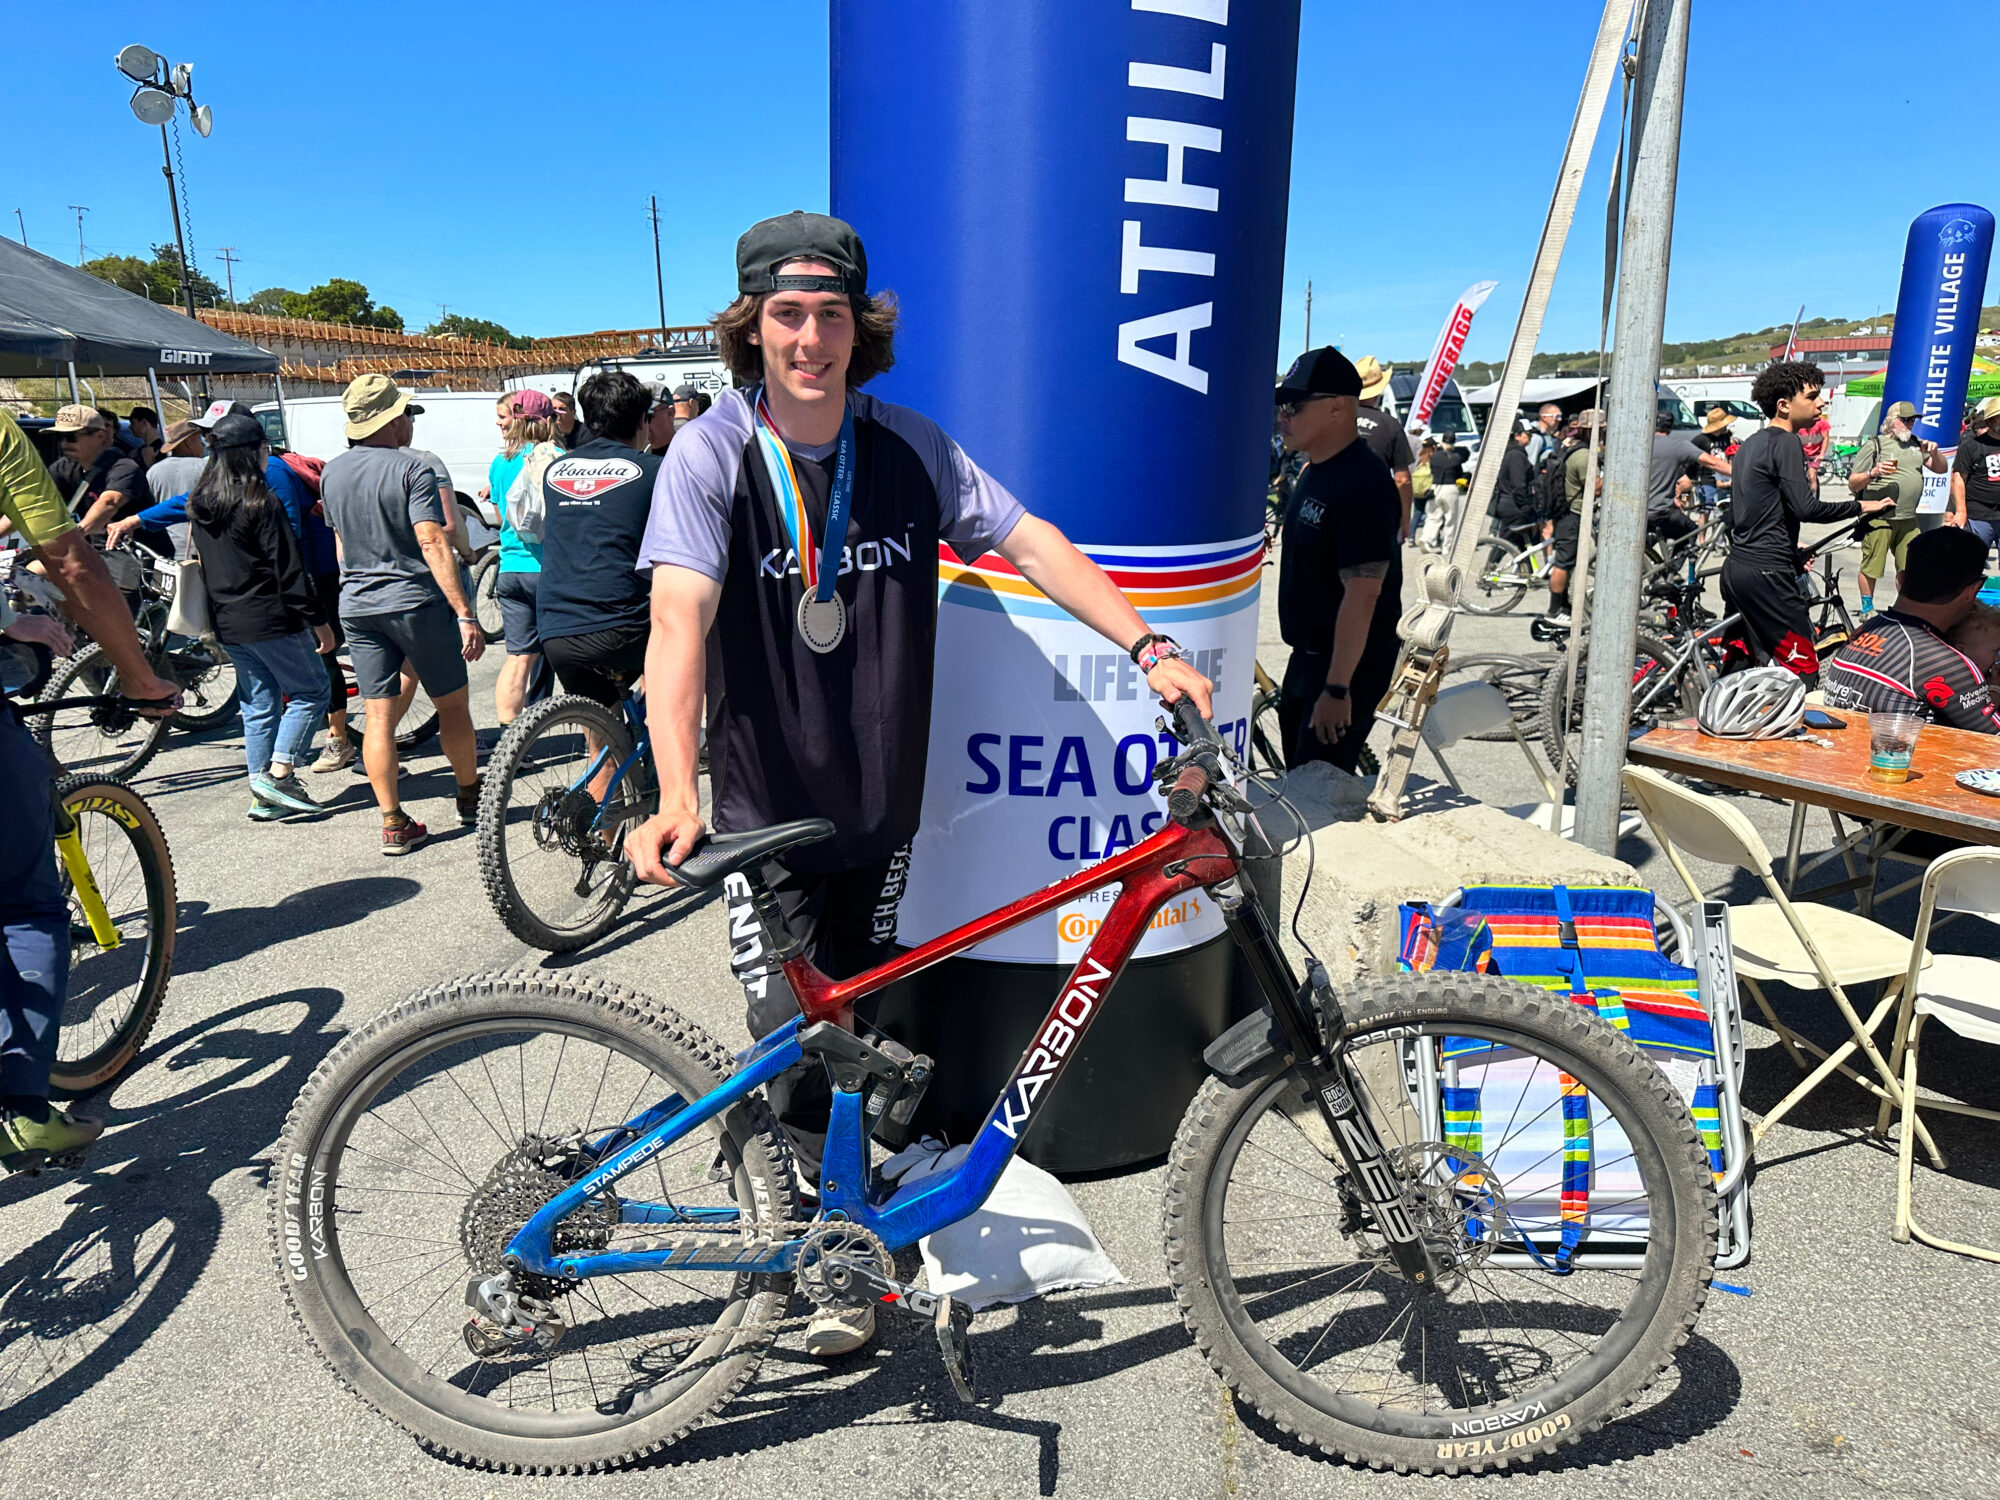 Liam second Place Finish On The Stampede At The Sea Otter Classic